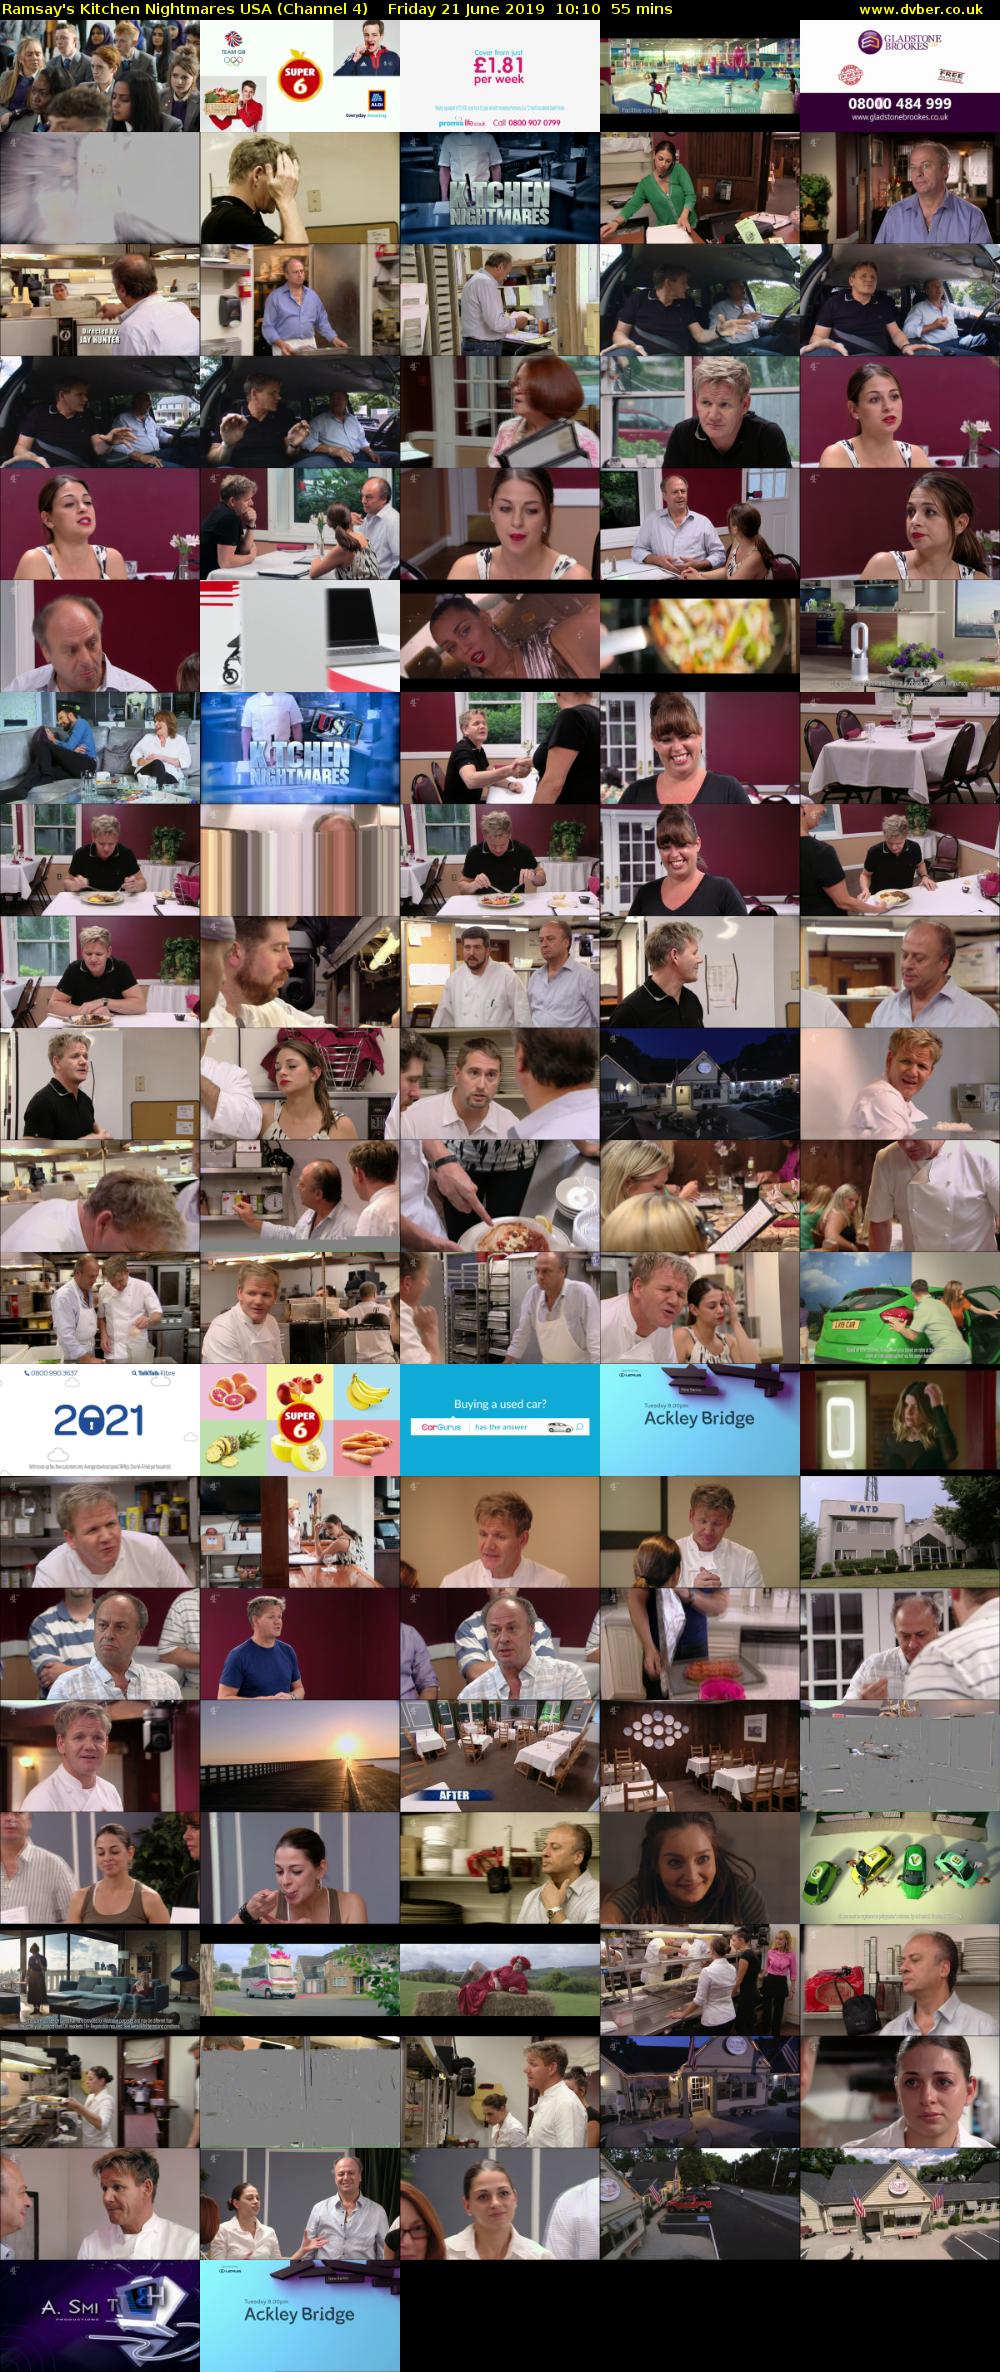 Ramsay's Kitchen Nightmares USA (Channel 4) Friday 21 June 2019 10:10 - 11:05